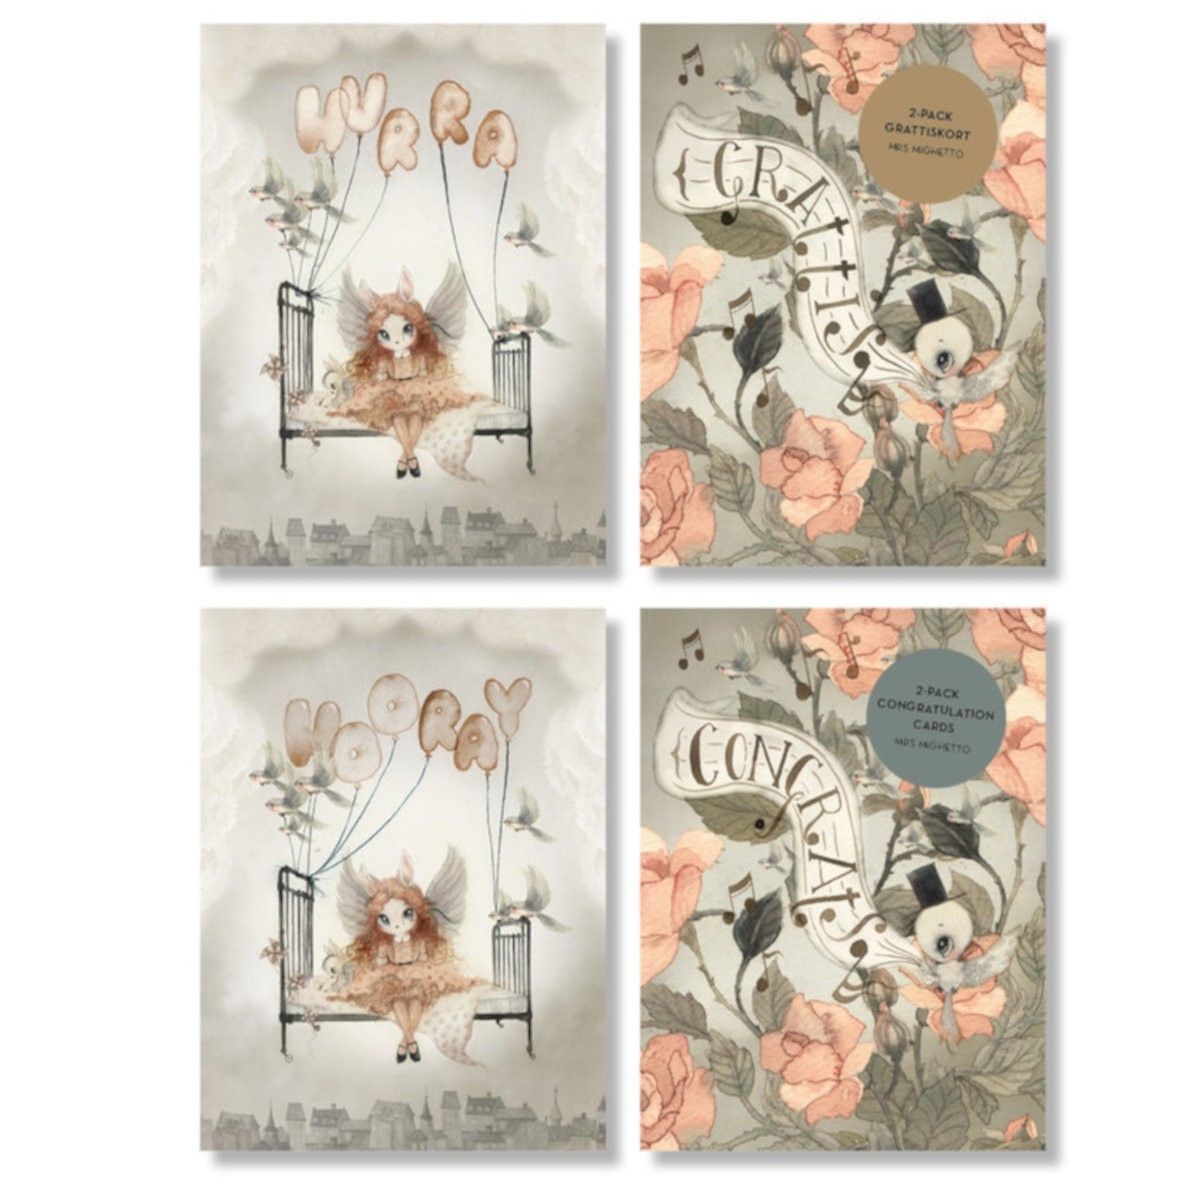 Mrs. Mighetto Two pack congratulation cards Roses MM-ROSES 